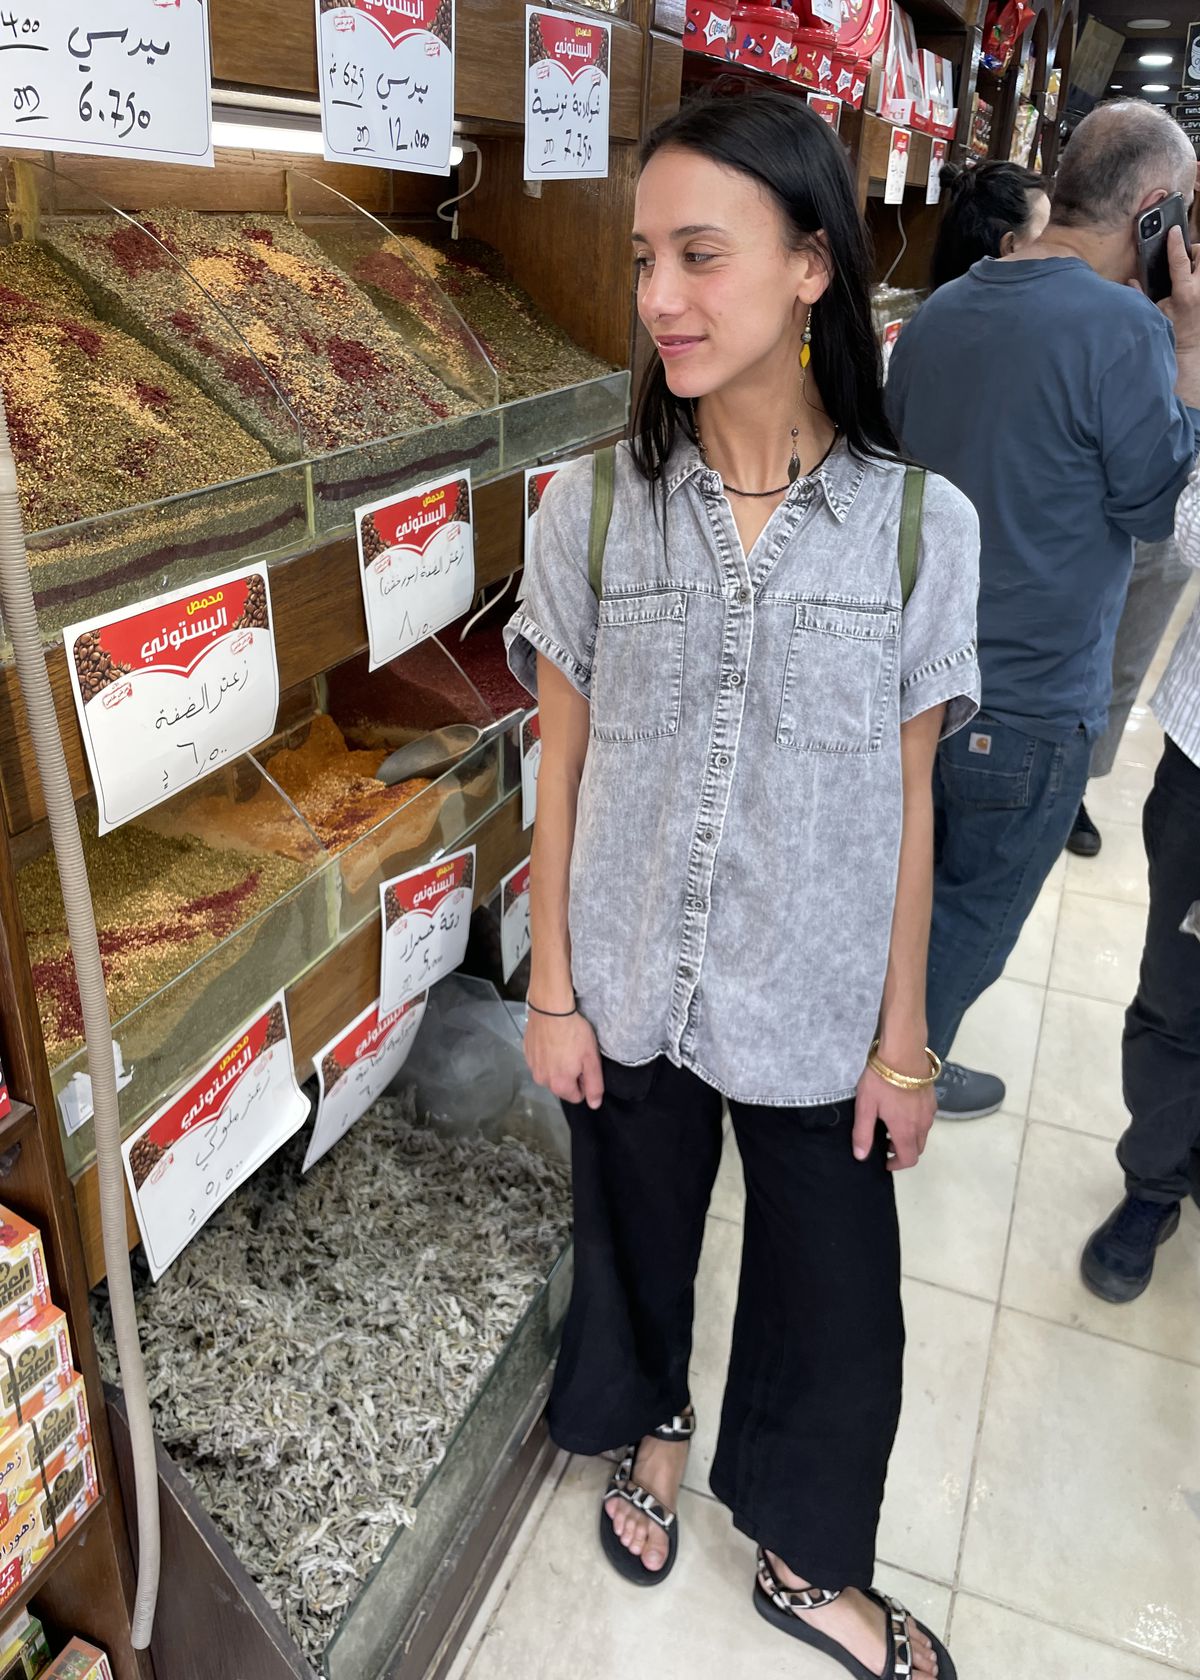 Lyla Abukhodair, wearing black pants and a grey button-down shirt, standing next to shelves of spices in a shop.